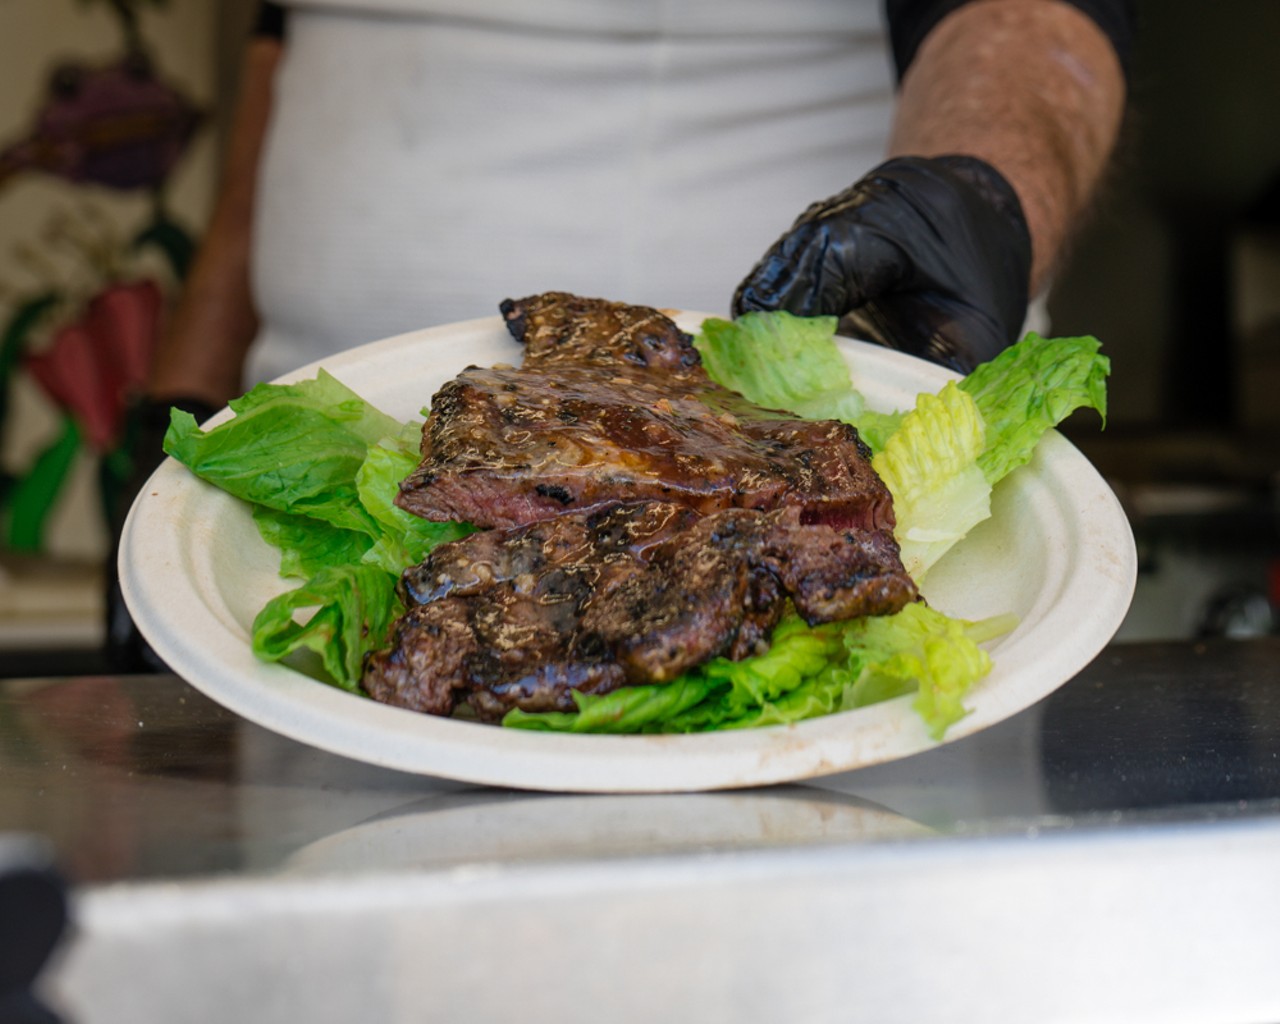 A first time vendor of the event, Wraptor Cafe shows off the ribeye steak used in their burgers.